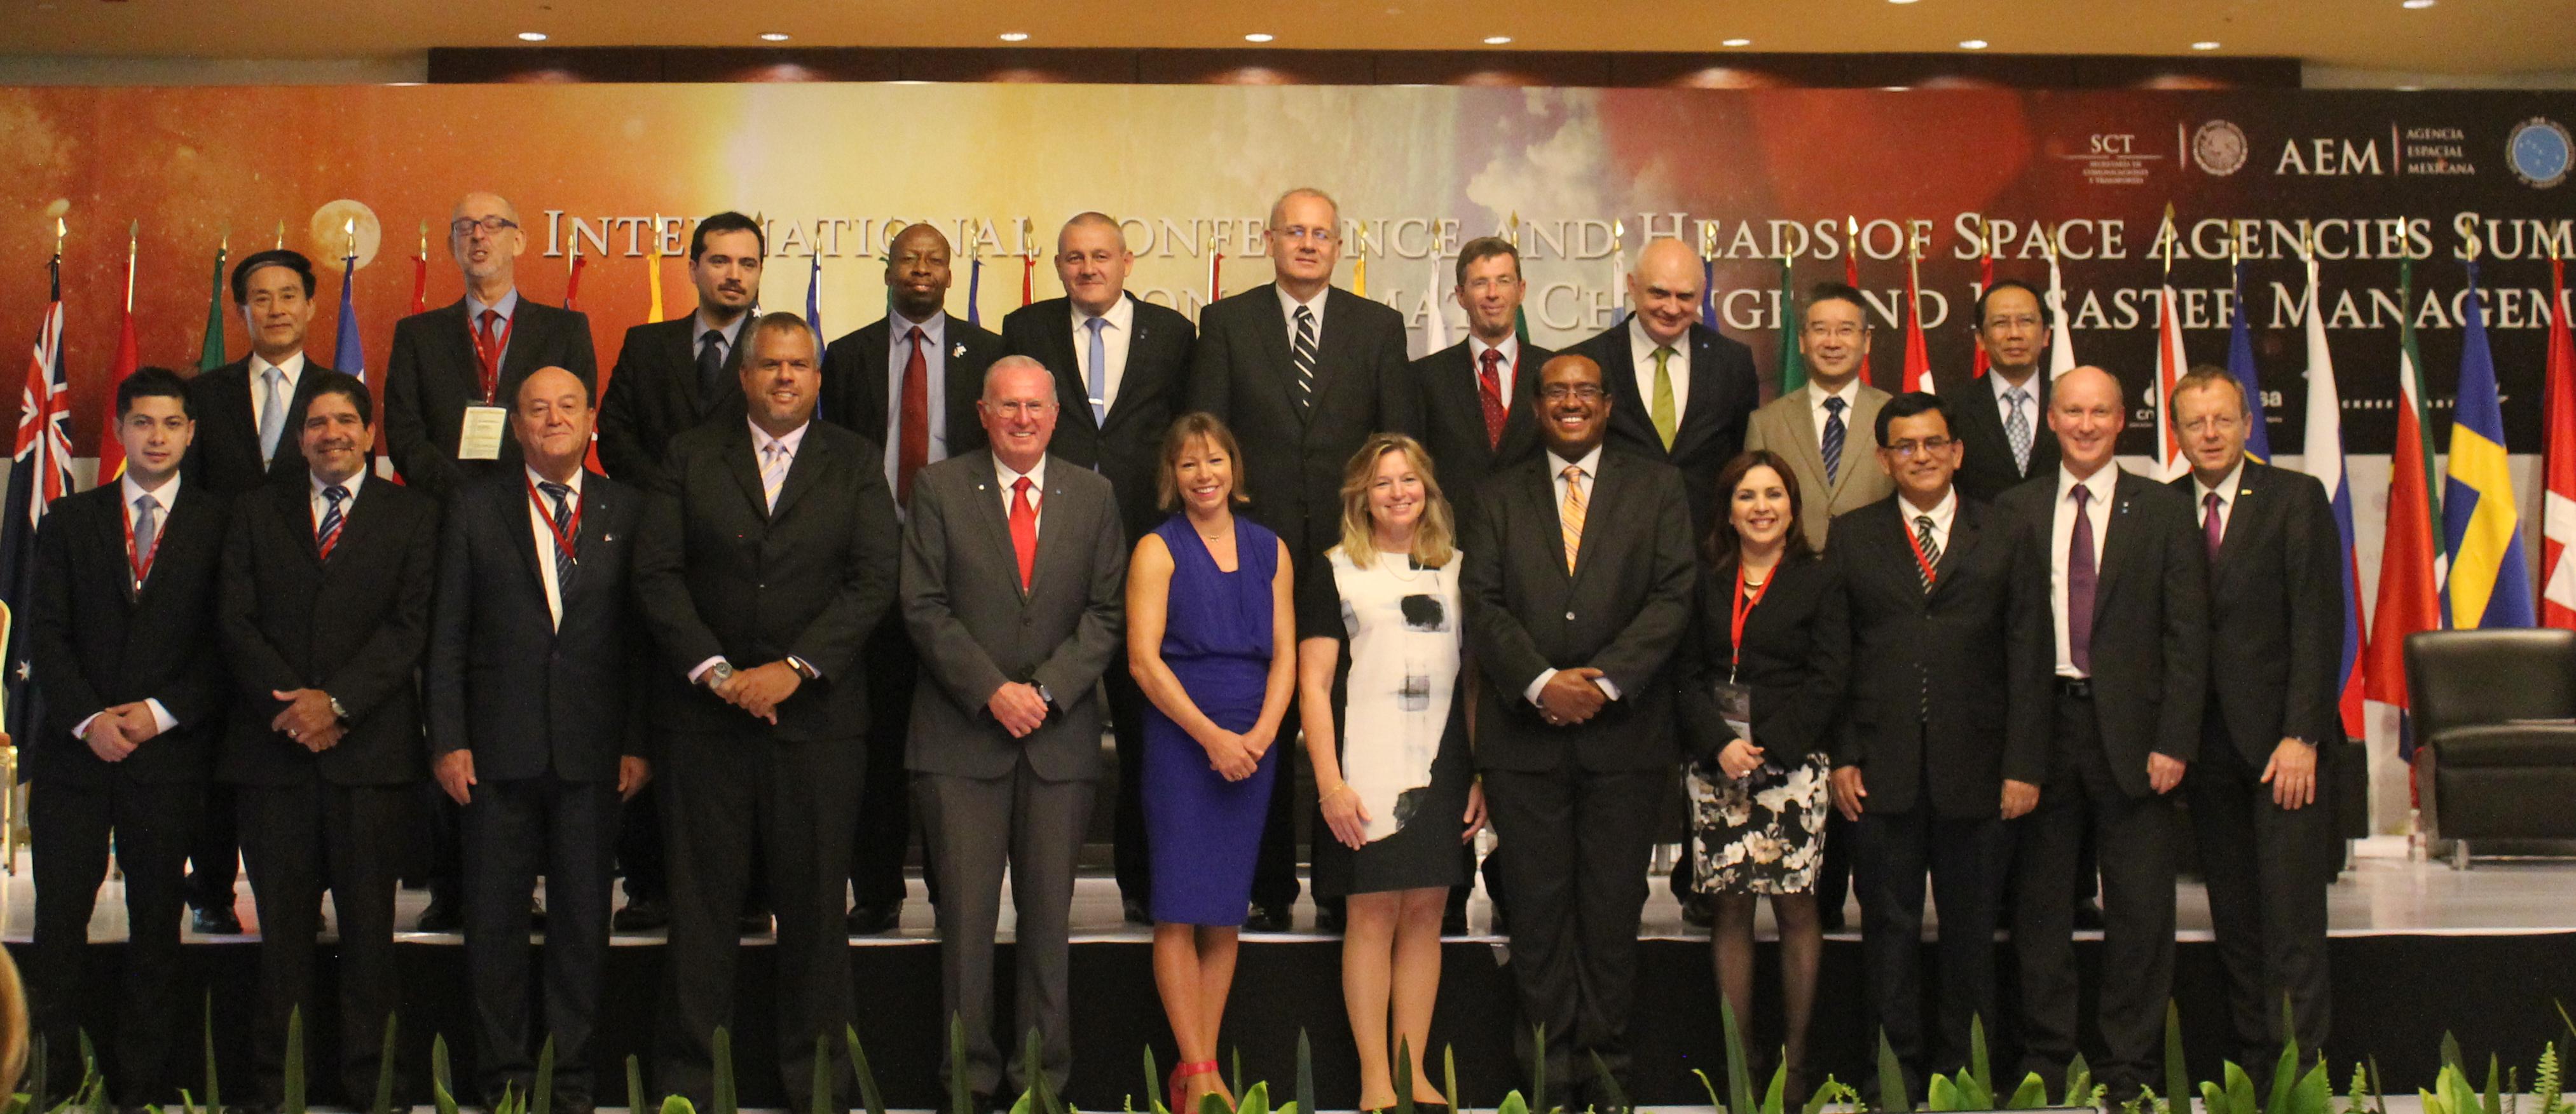 Heads of Space Agencies Summit, Mexico